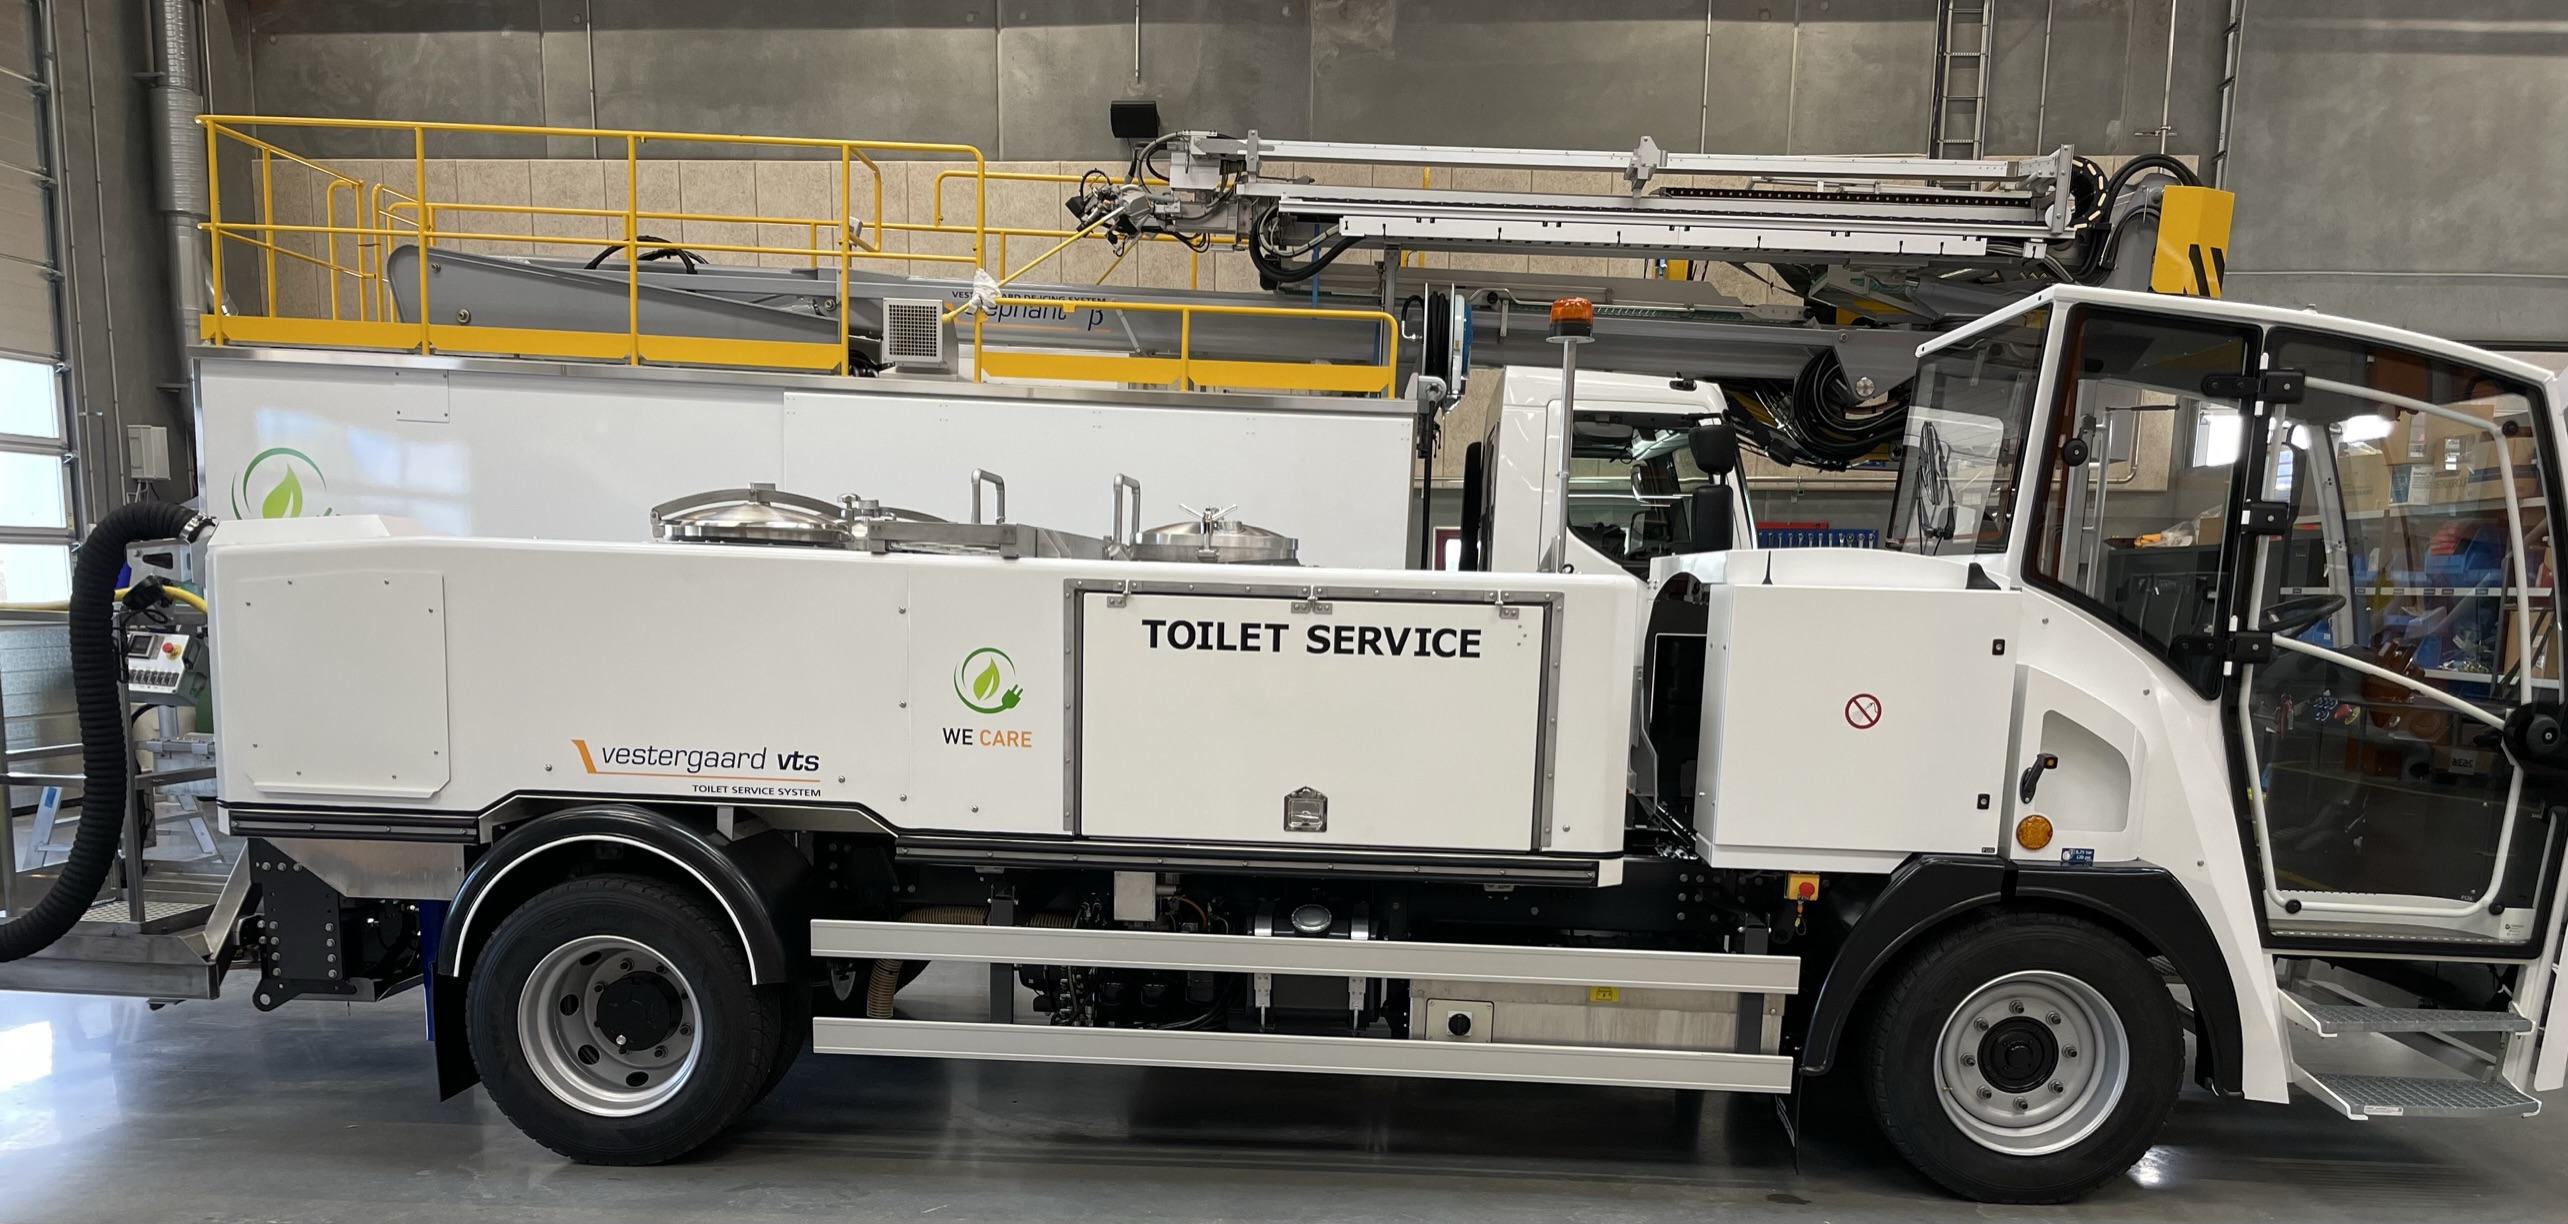 Vestergaard unveils electric de-icer and toilet service truck at GSE Expo